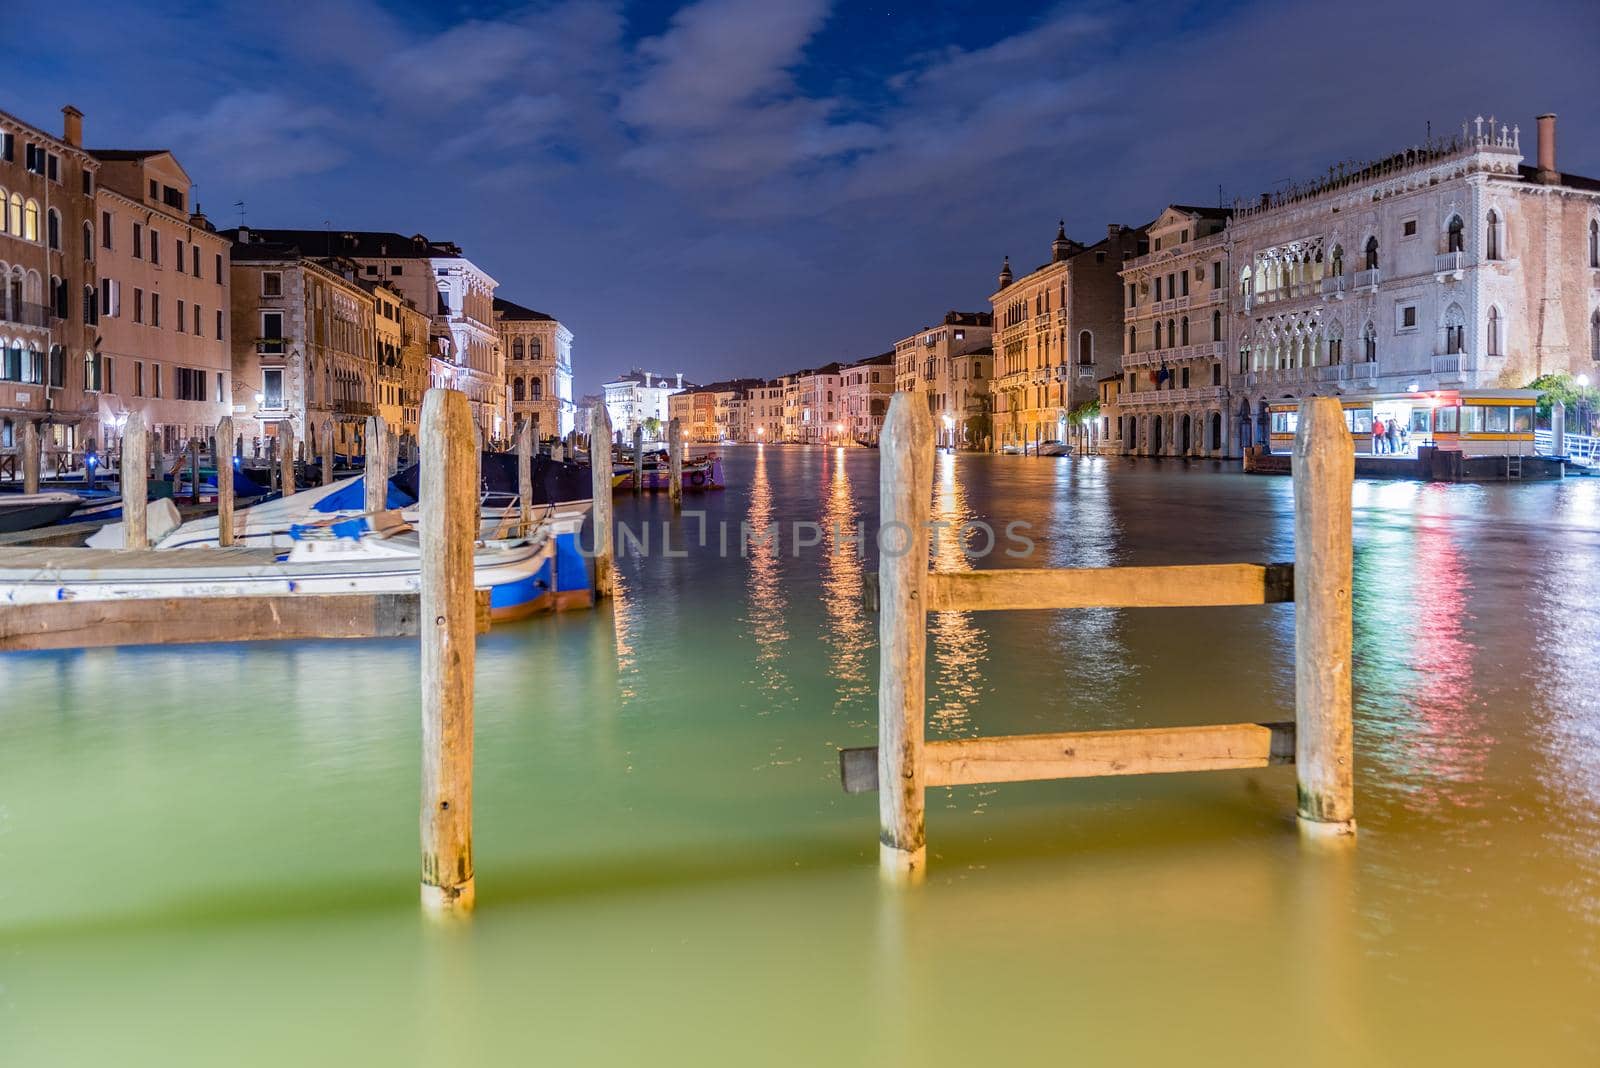 Scenic view at night over the Grand Canal between Cannaregio and San Polo districts of Venice, Italy